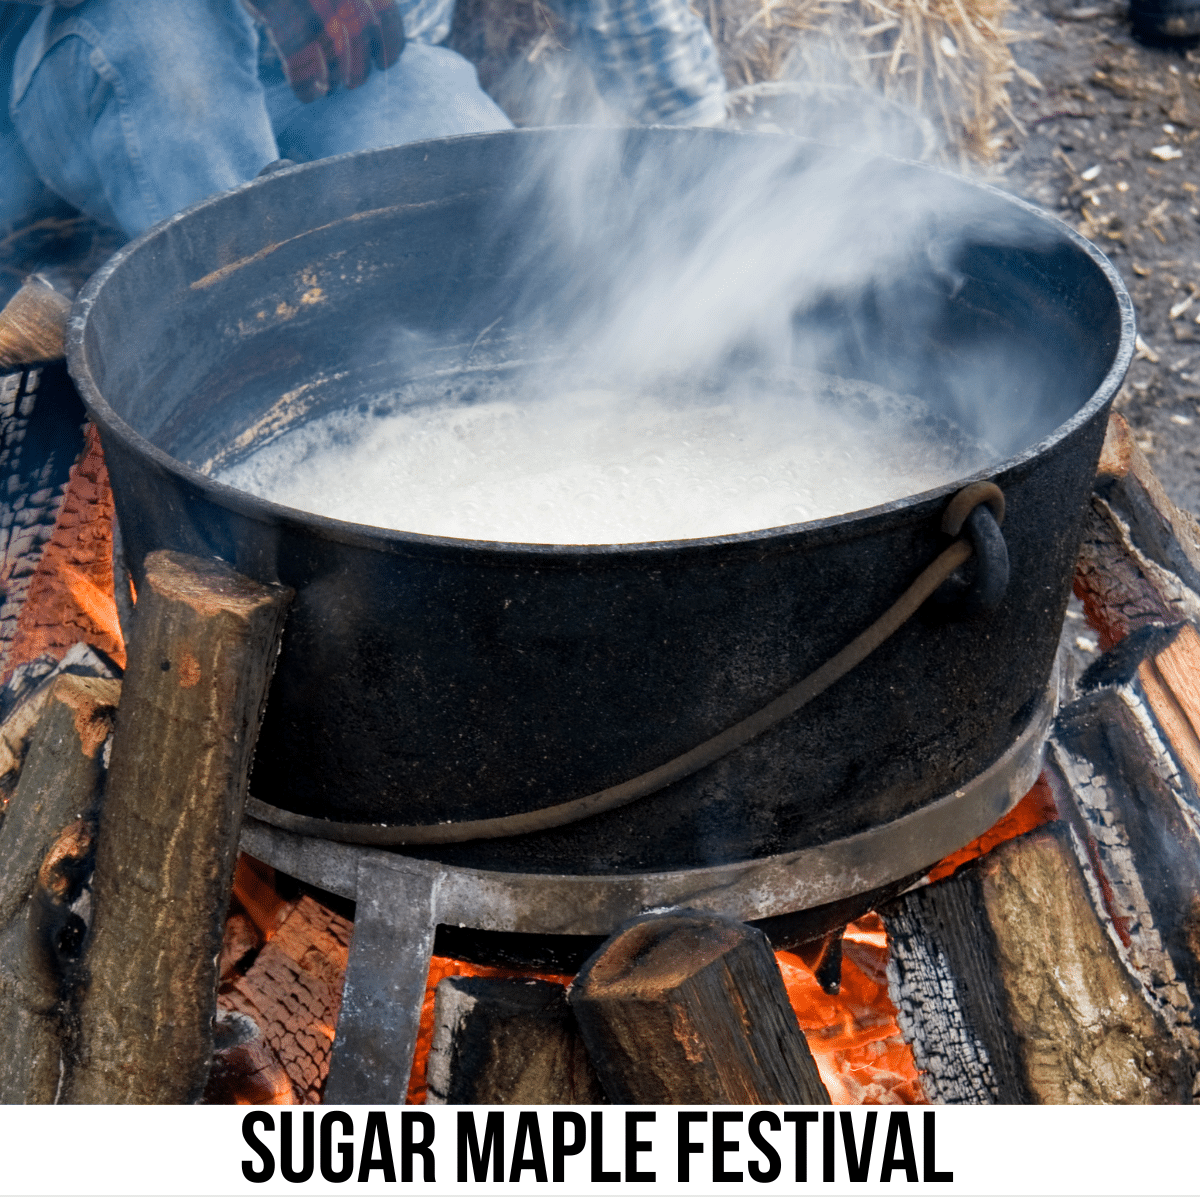 A square image of a photo of a large, steaming cast iron container over wood on a fire. A white strip at the bottom has text Sugar Maple Festival.